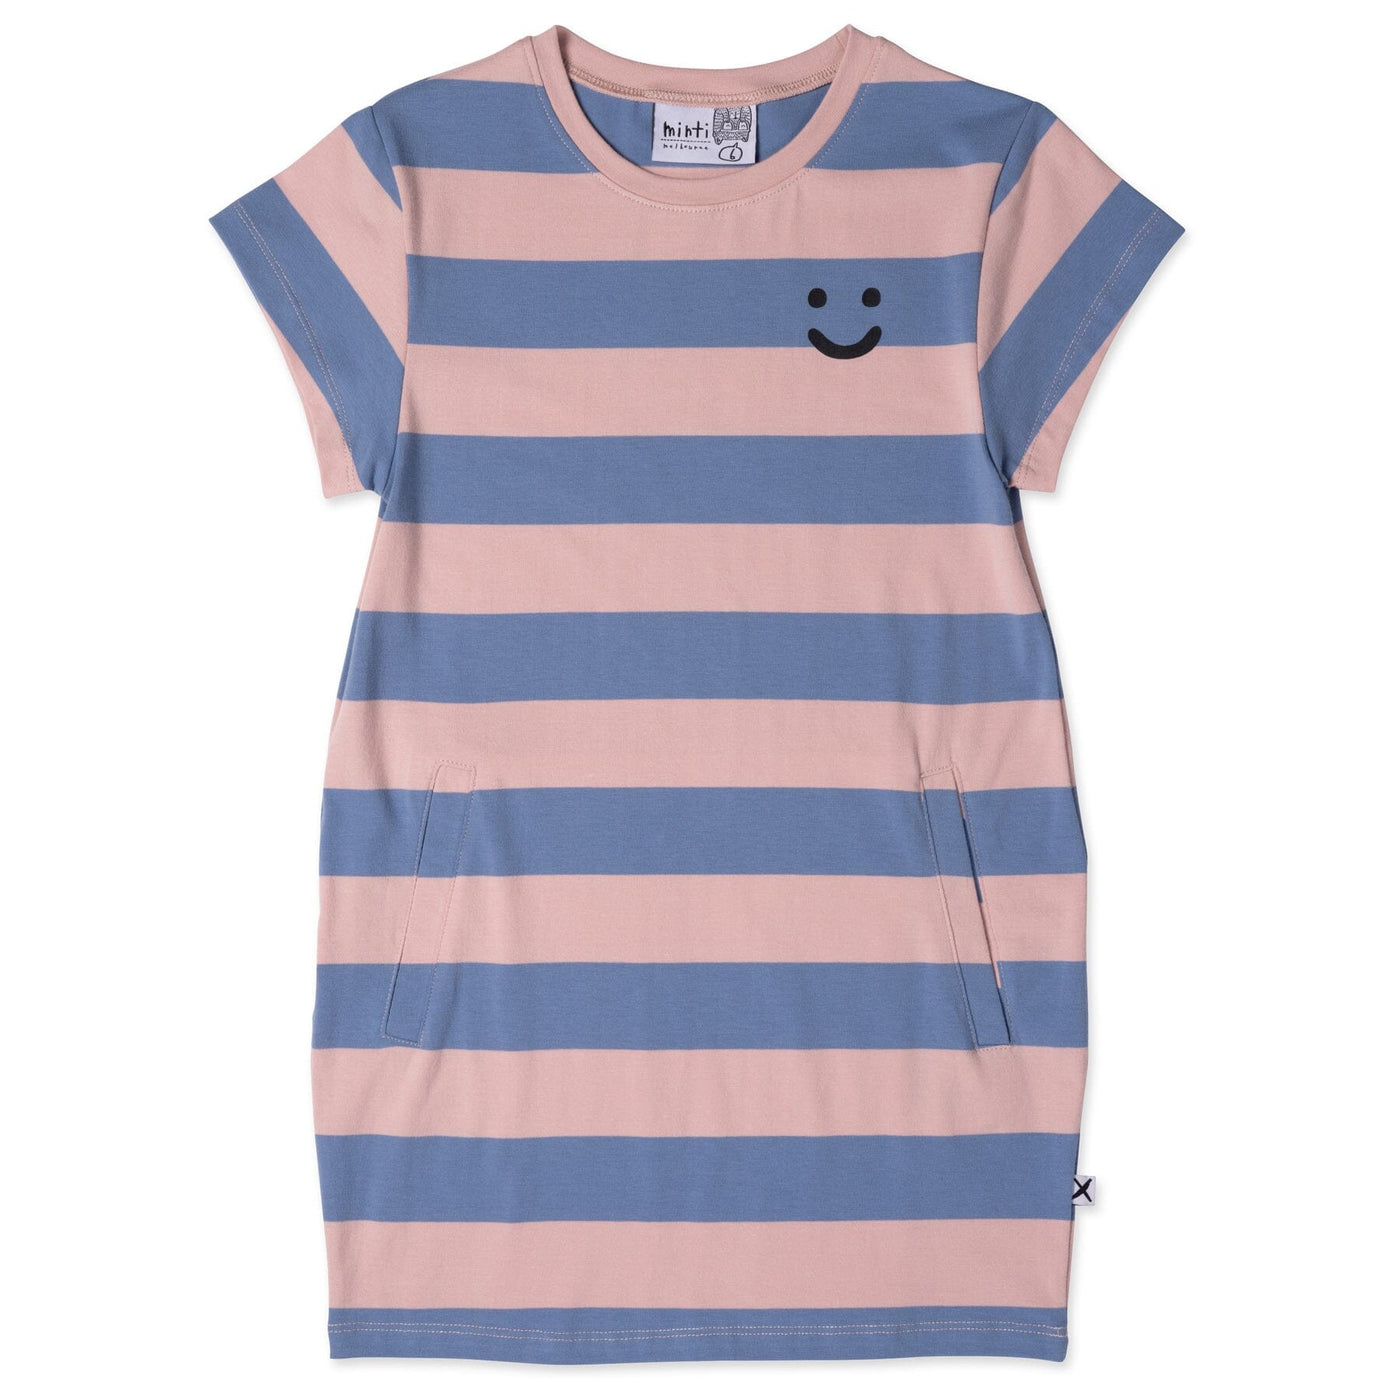 PREORDER Minti Happy Face Tee Dress - Muted Pink/Muted Blue Short Sleeve Dress Minti 